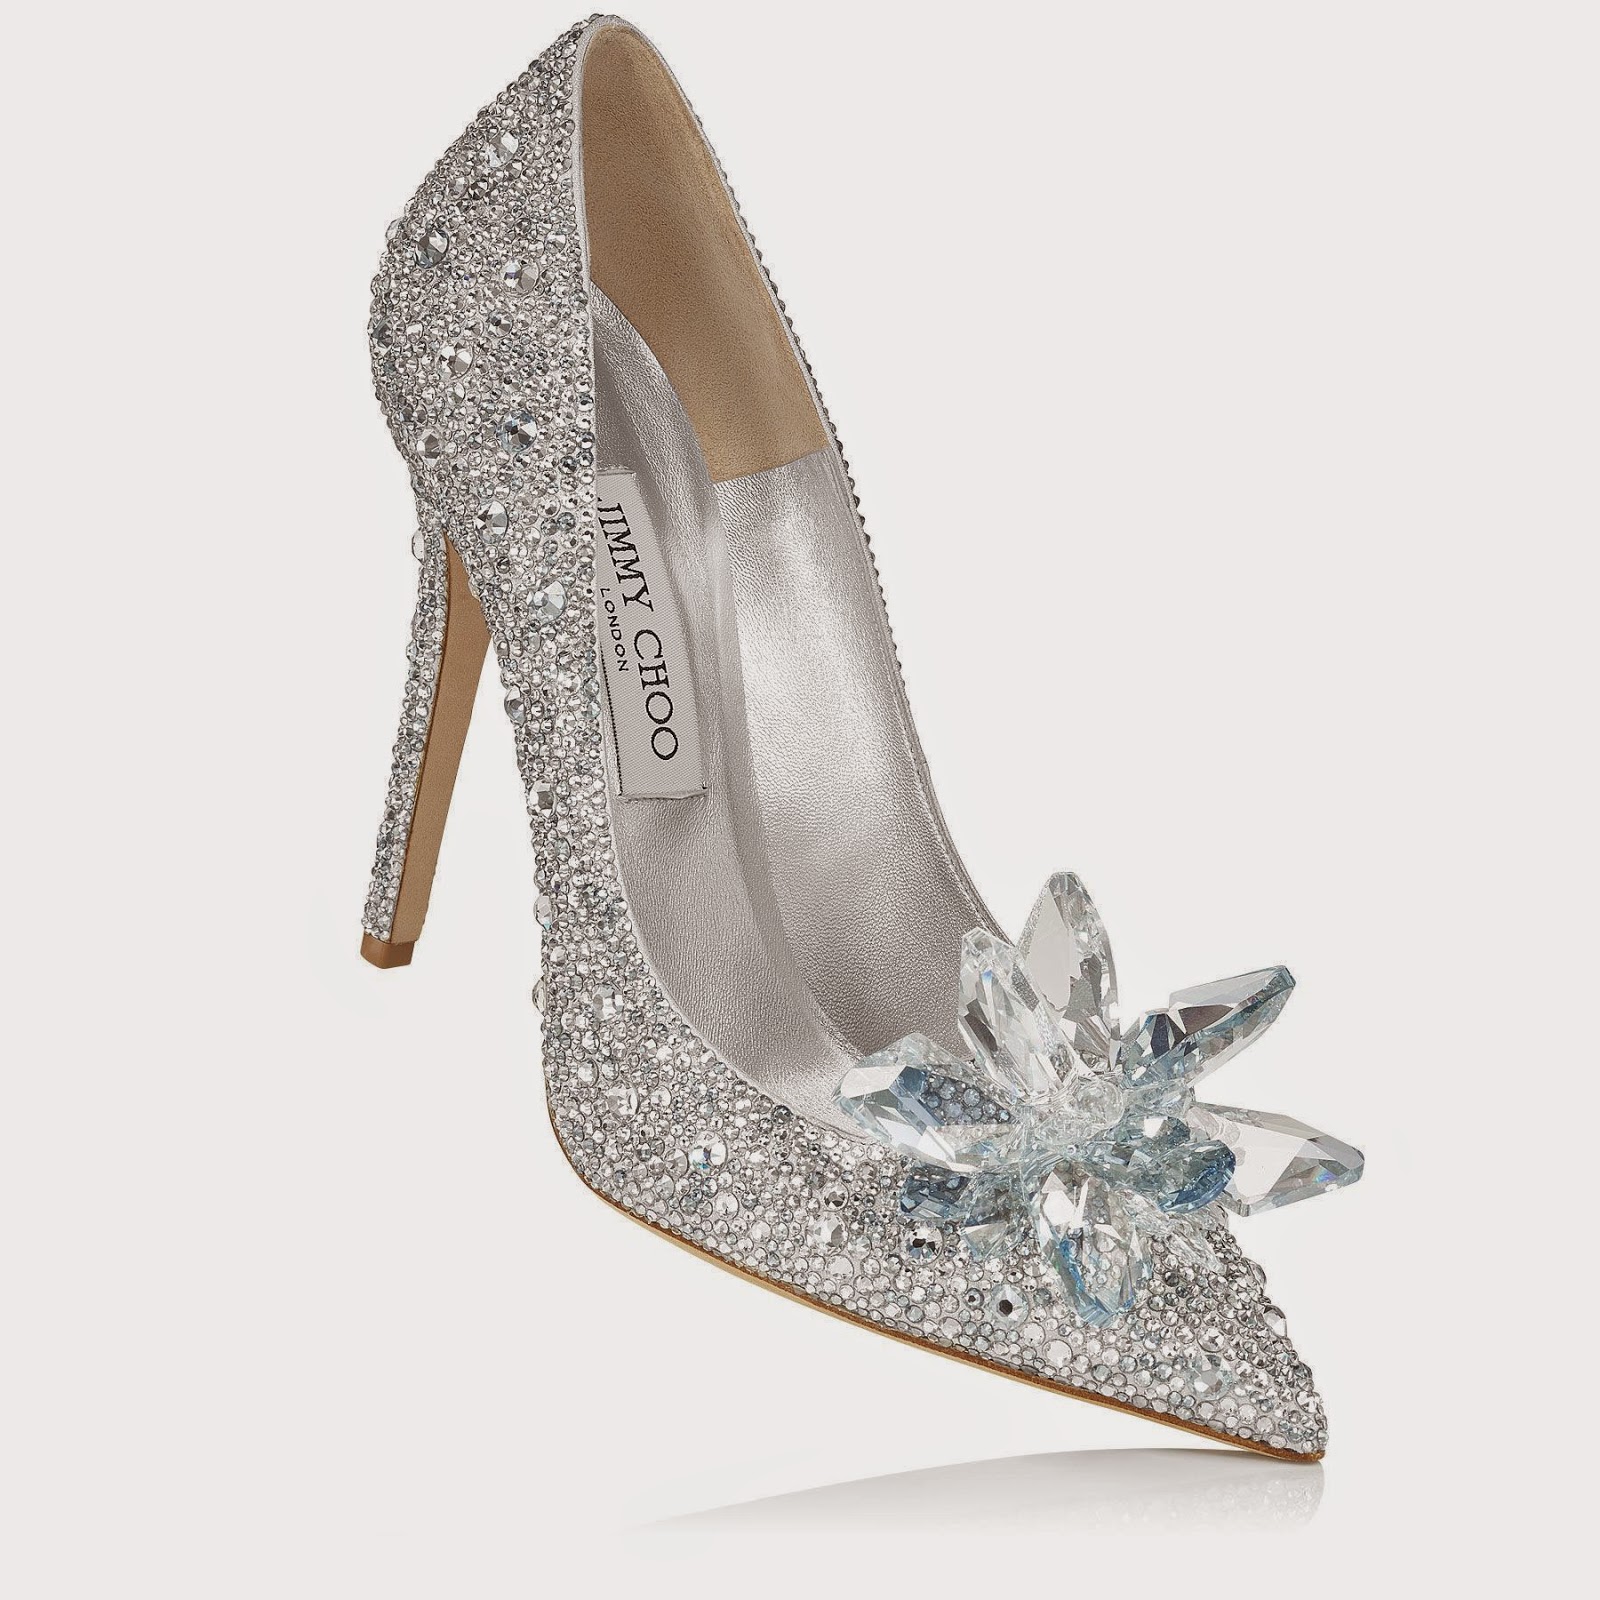 Shoe Daydreams: A Dream is a Wish Your Heart Makes